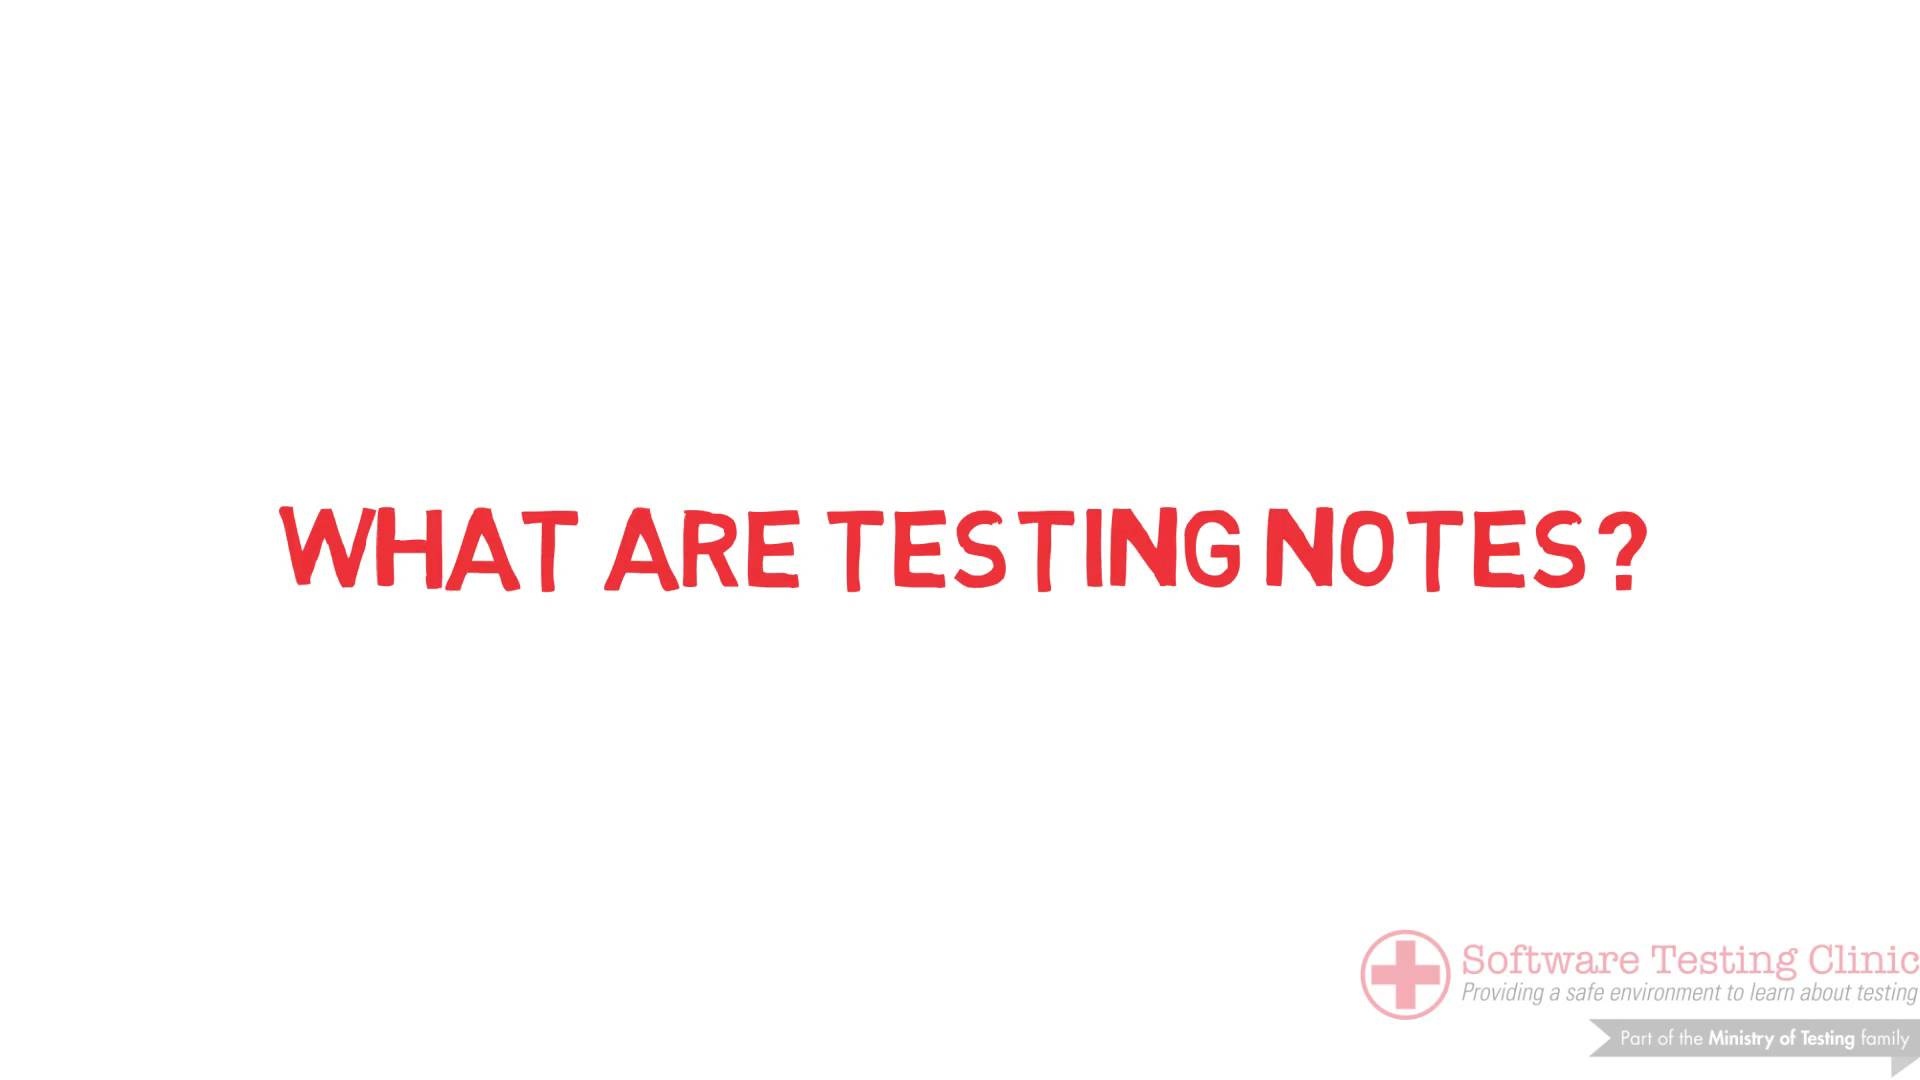 What are Testing Notes?